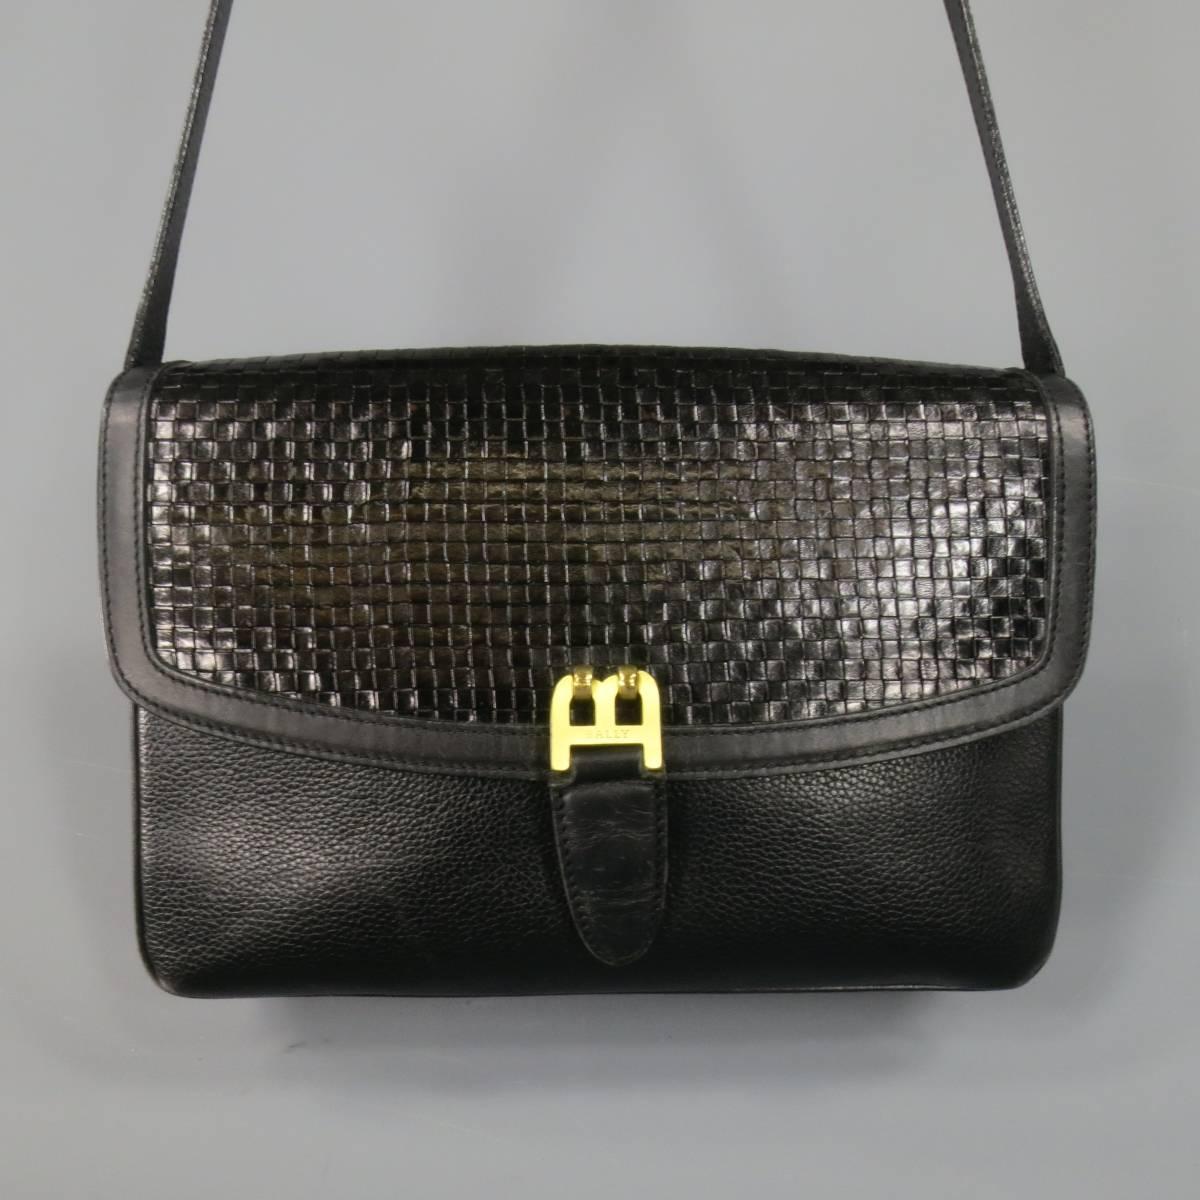 This rare vintage BALLY handbag comes in black pebbled leather and features a woven leather flap with gold tone B 